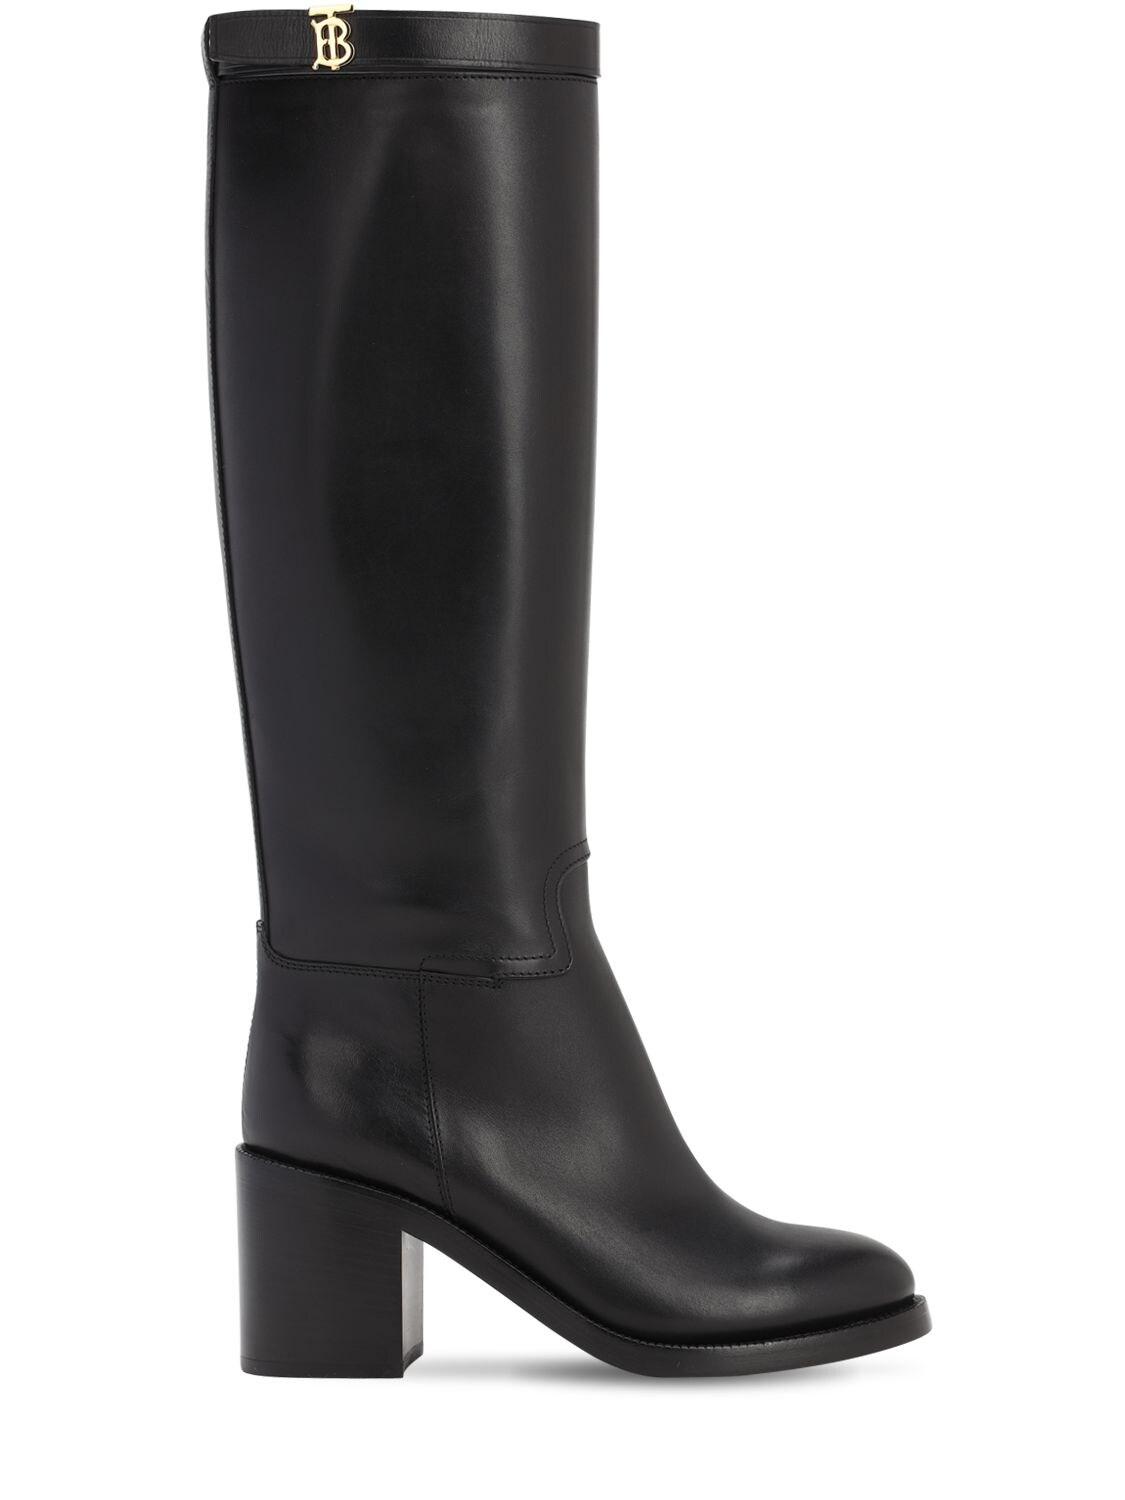 Burberry 70mm Redgrave Leather Tall Boots in Black | Lyst